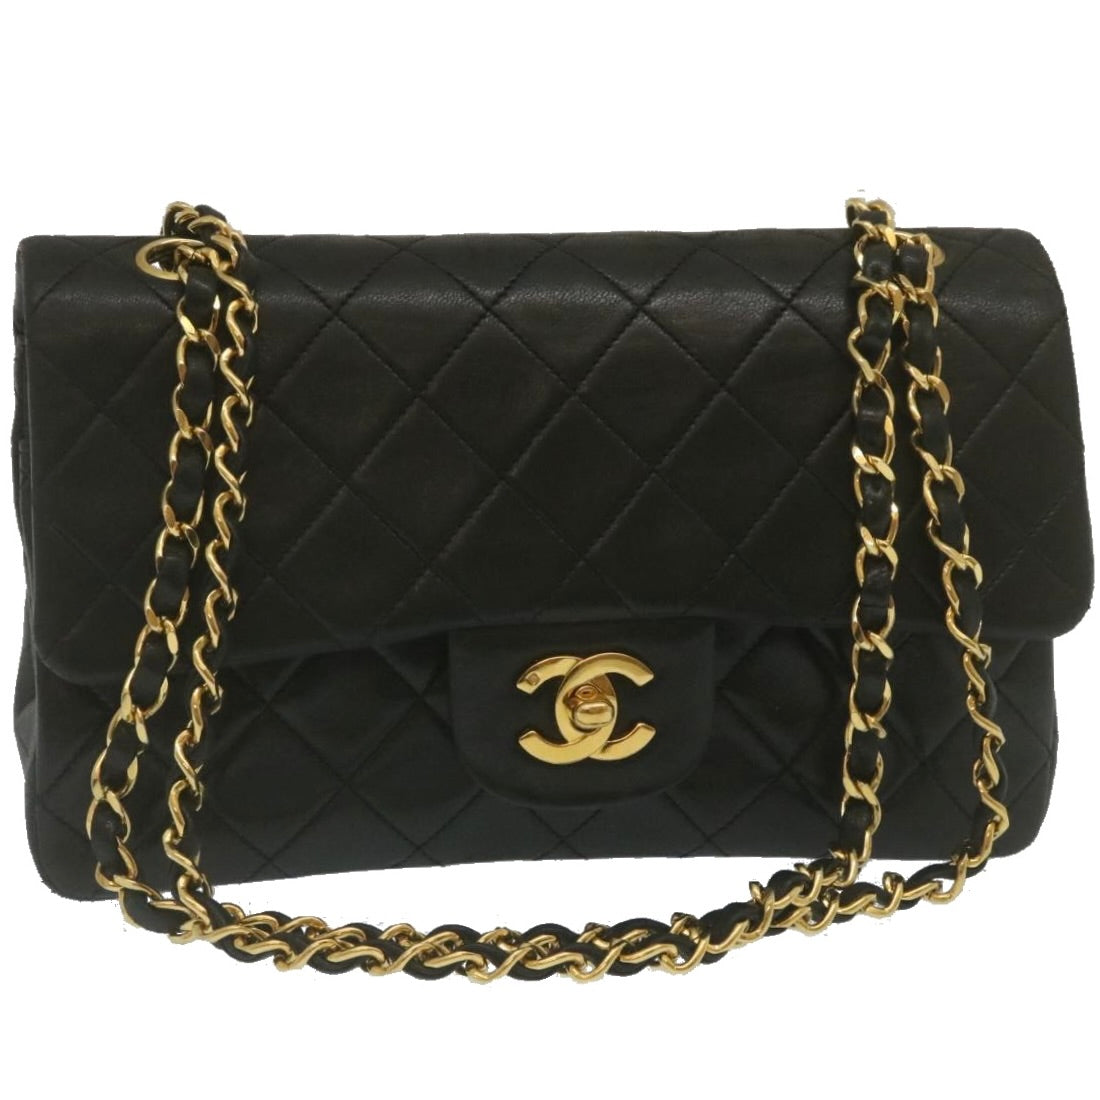 Chanel Vintage Classic Flap Review & Fashionphile Shopping